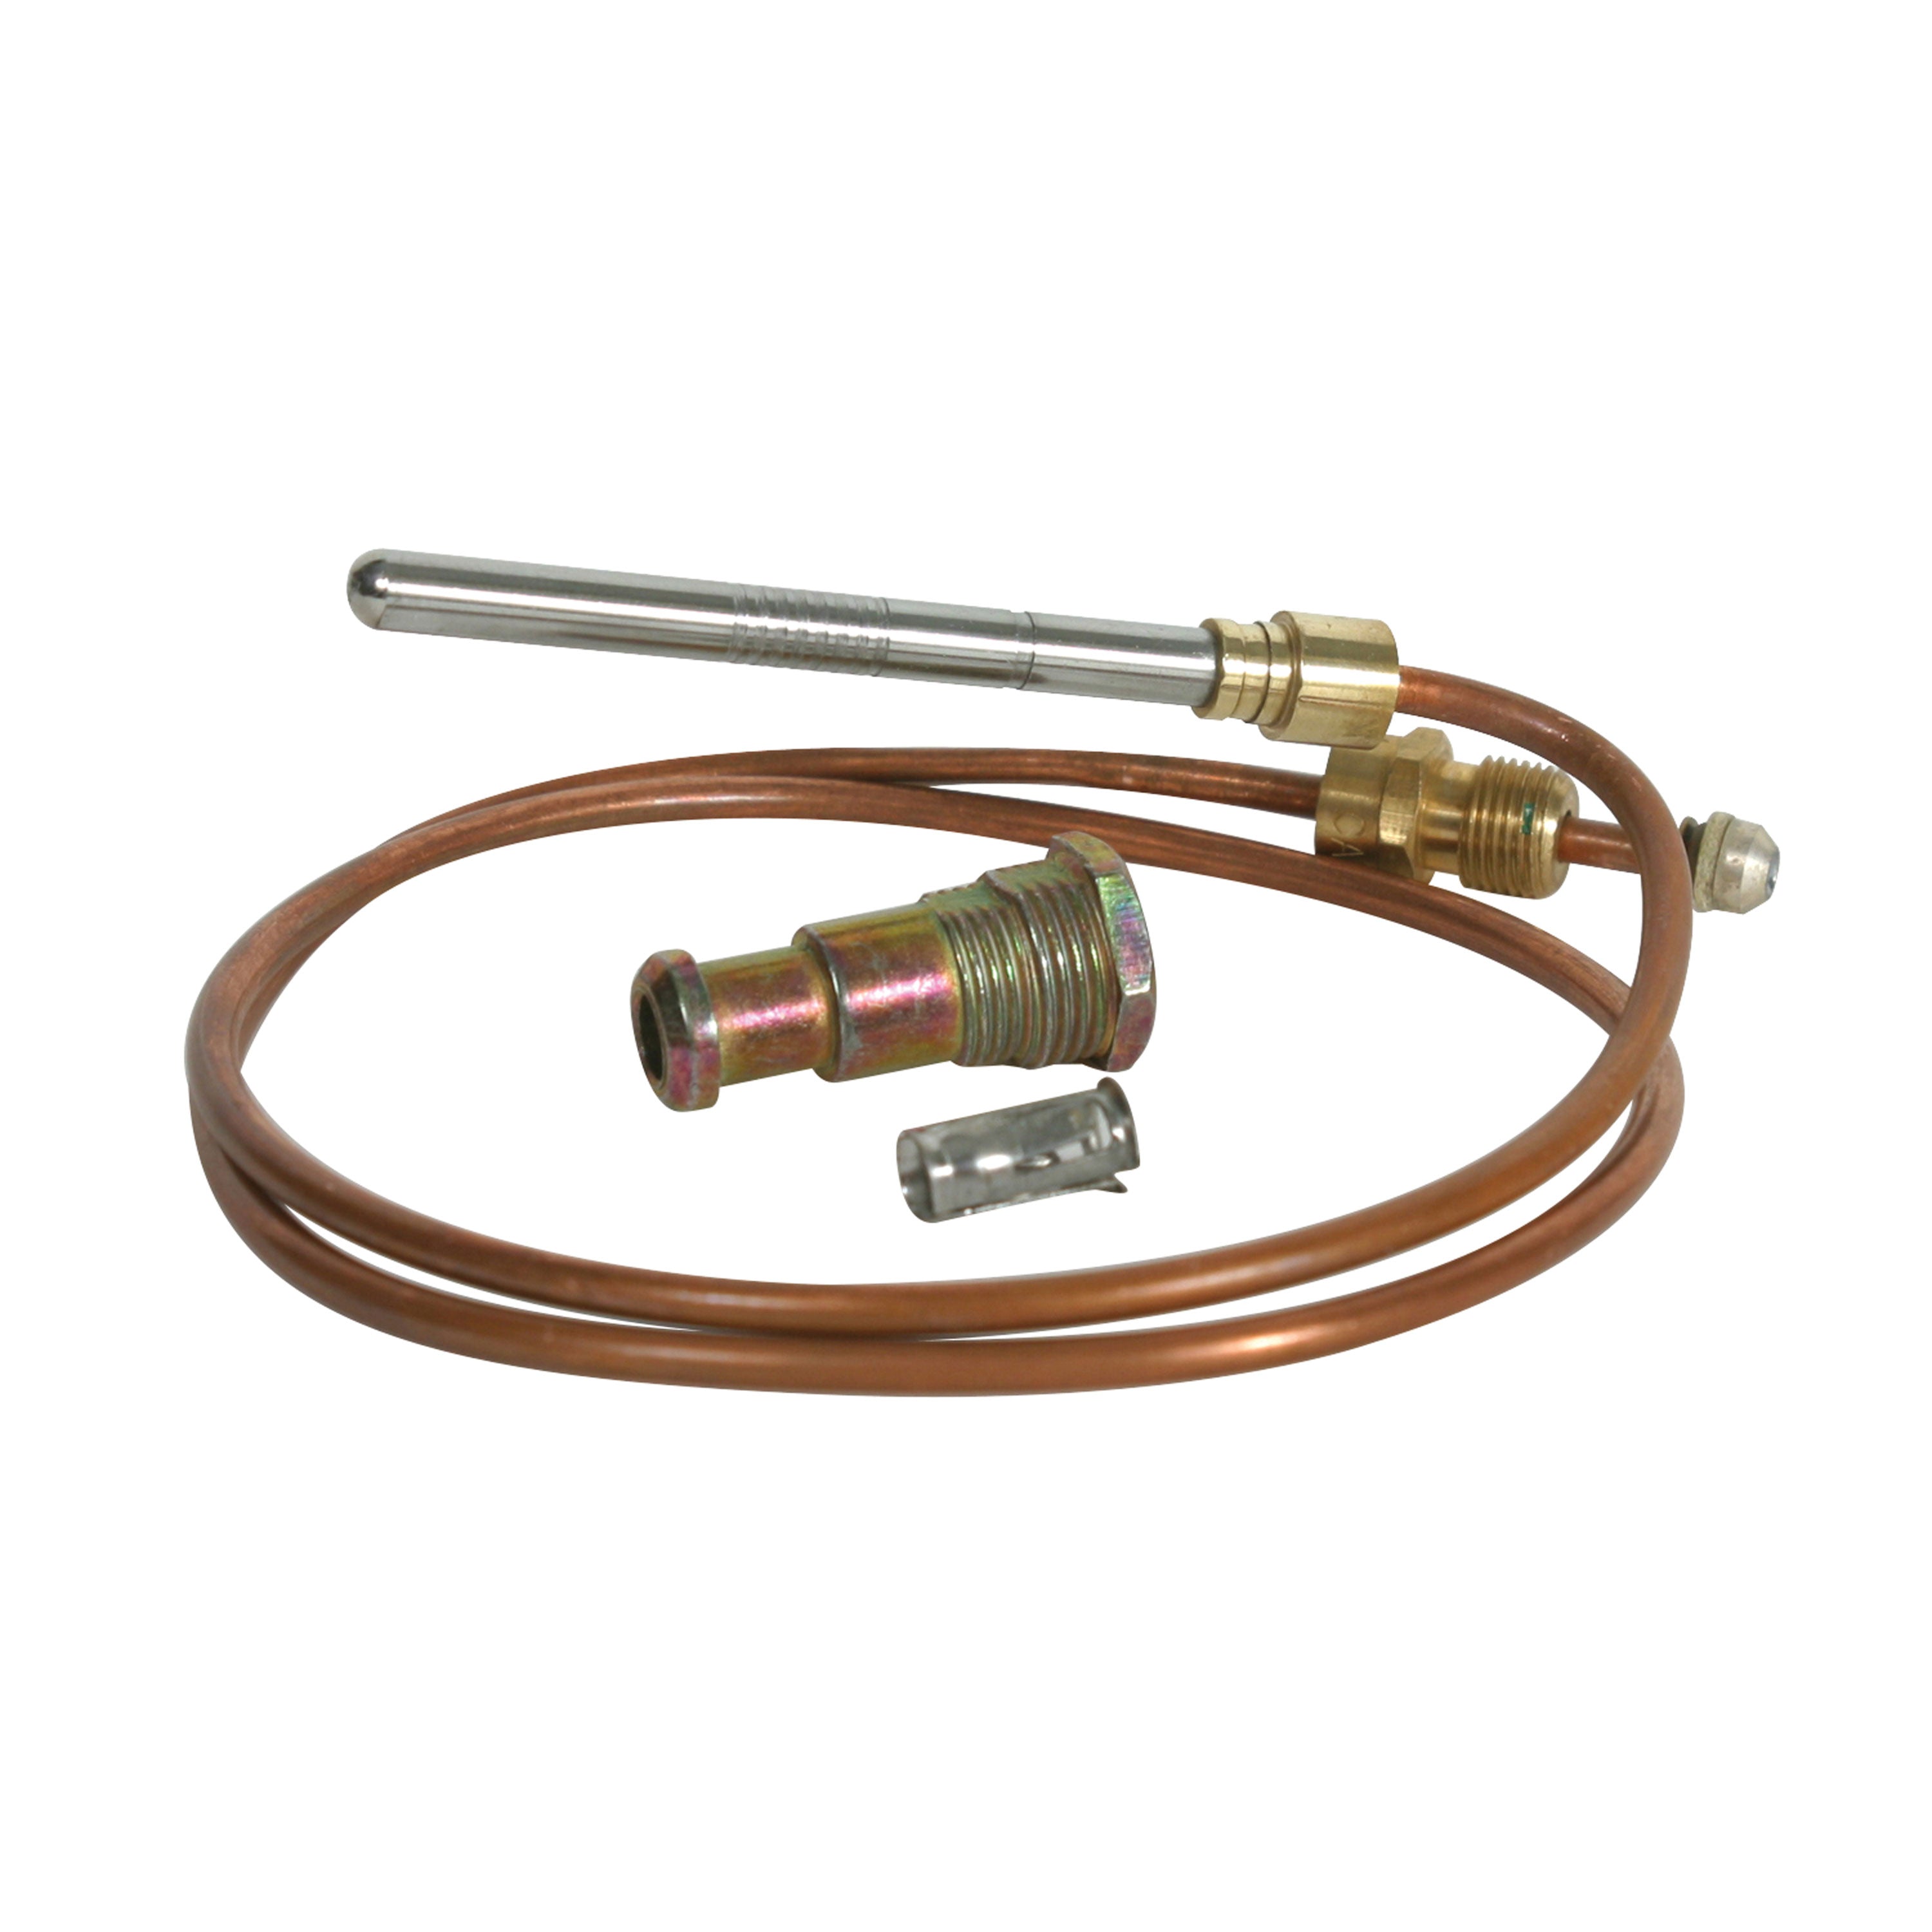 Camco 09293 Thermocouple Kit - 24"